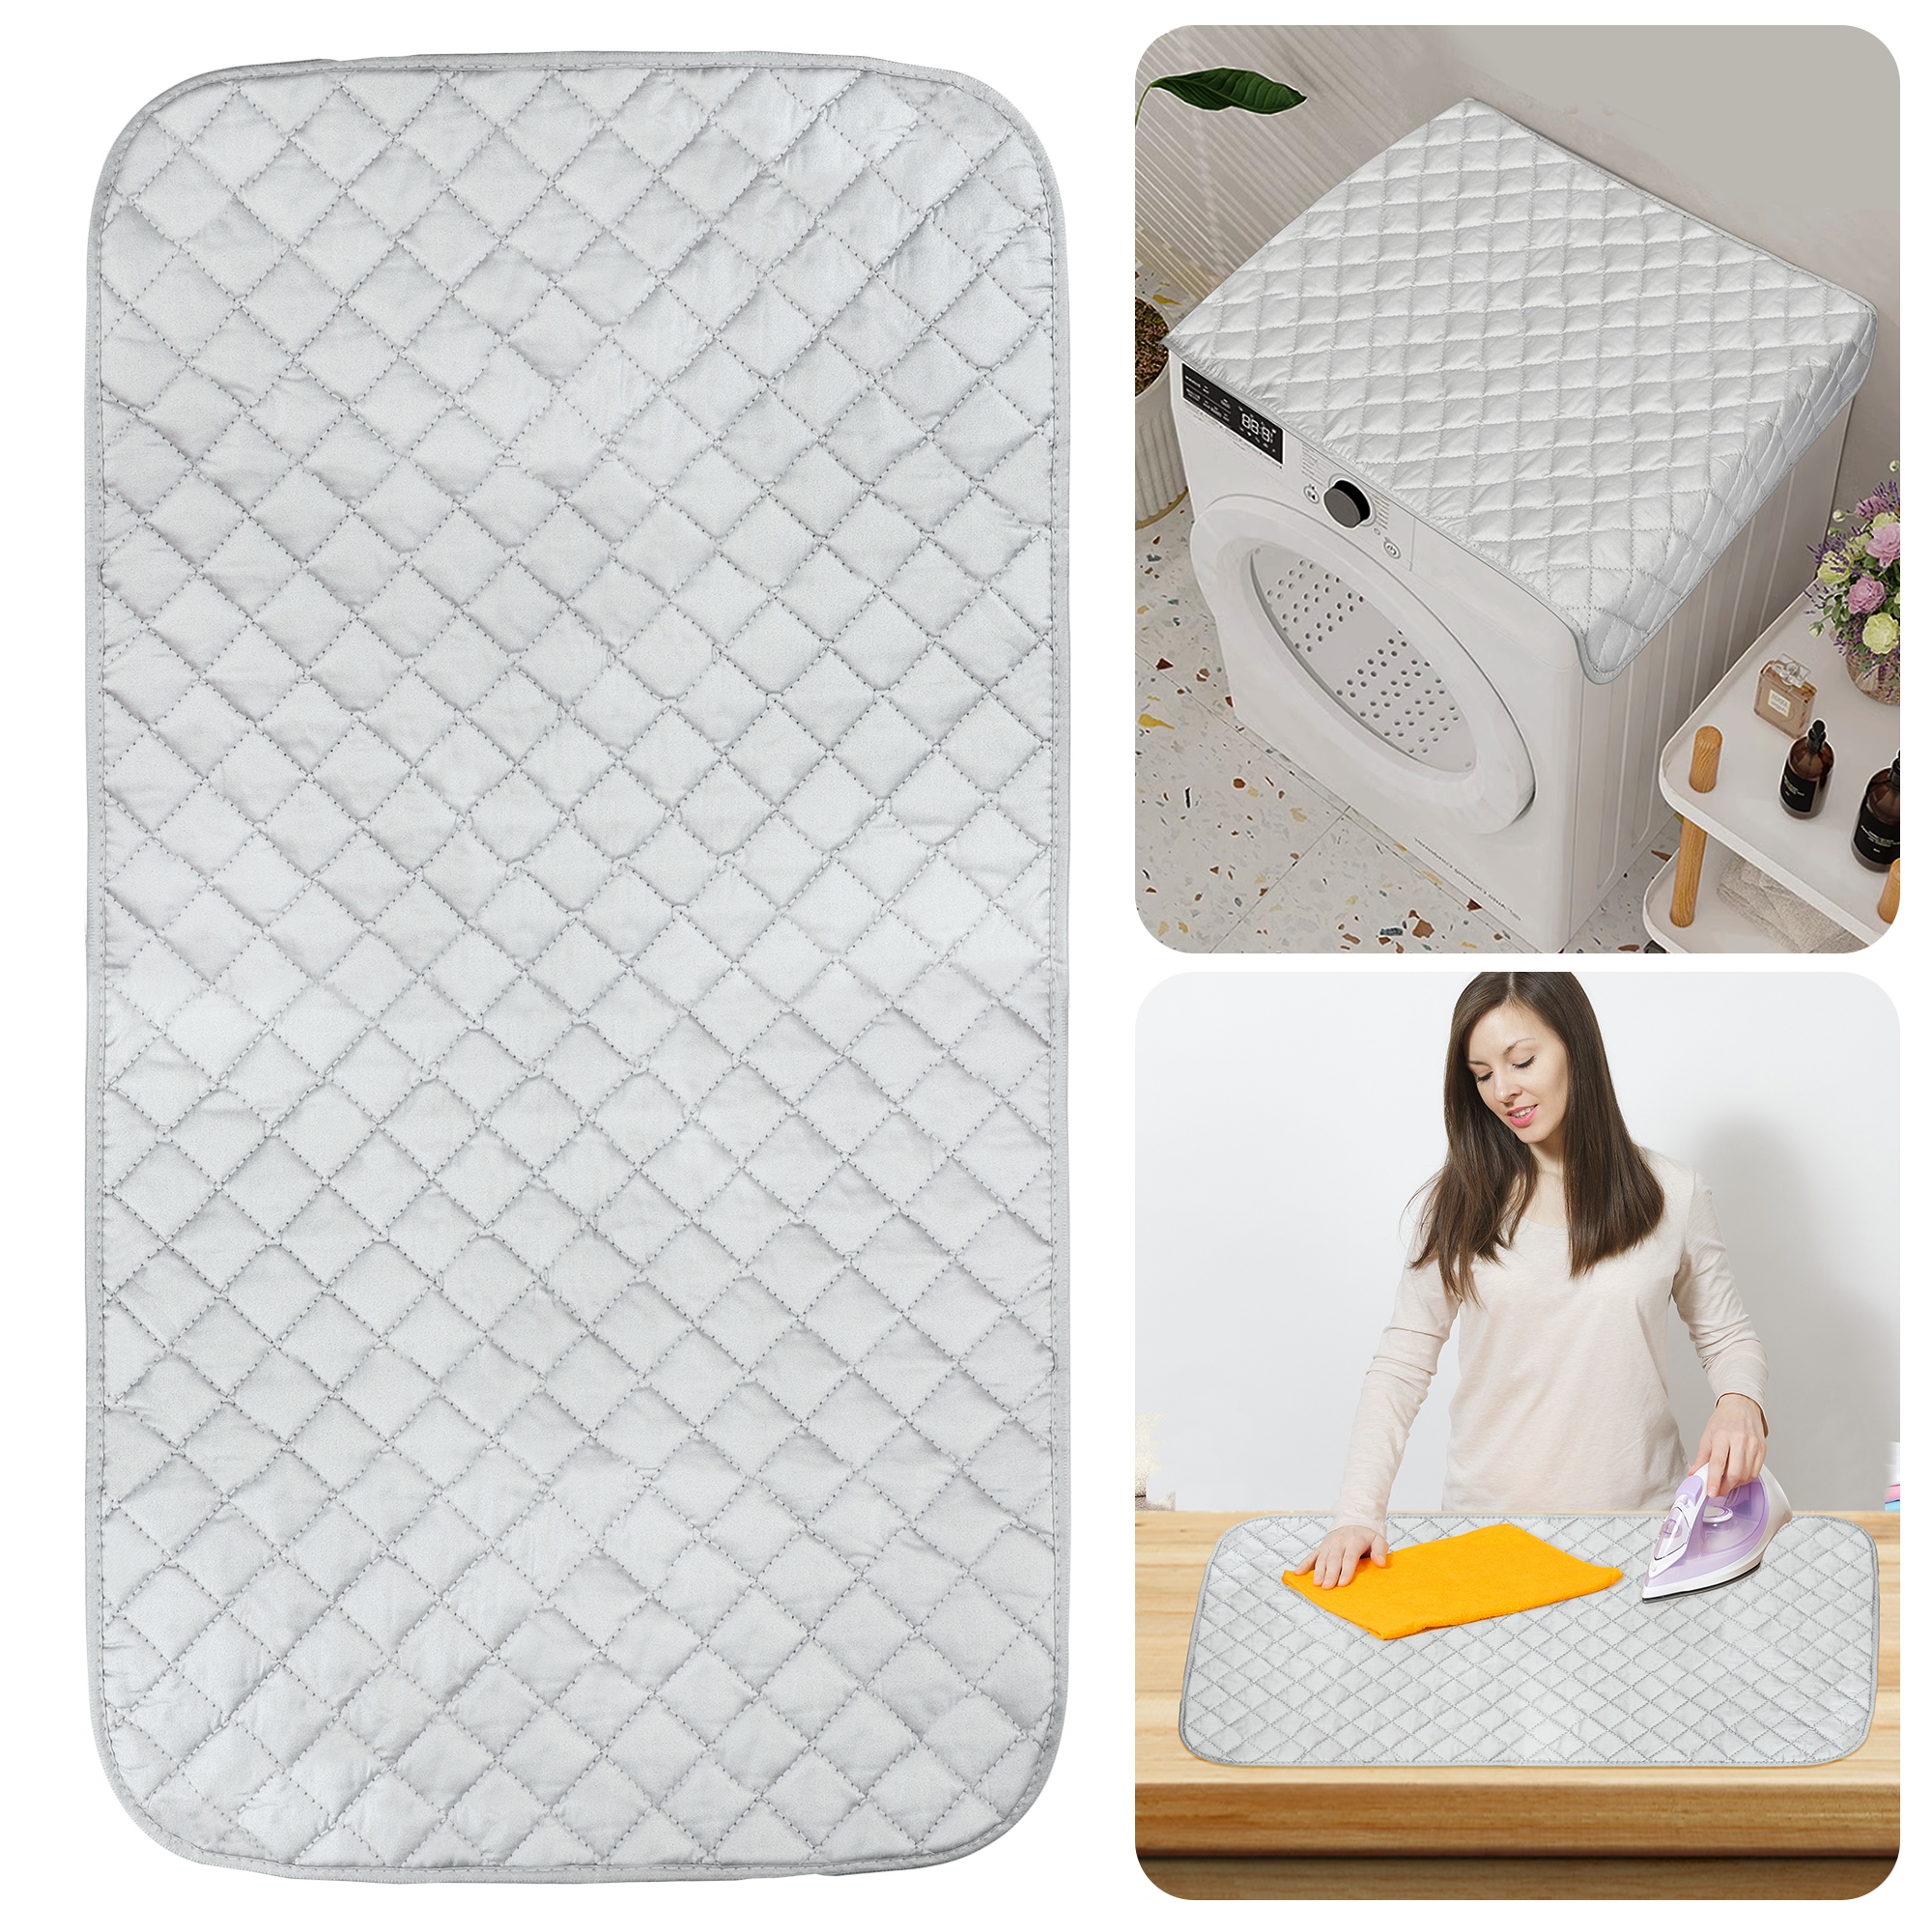 EEEkit 32x18 inch Magnetic Ironing Blanket Mat, Heat Resistant Quilted Laundry Pad, Alternative for Iron Board, Size: 33.5*19in (Large*W), Silver